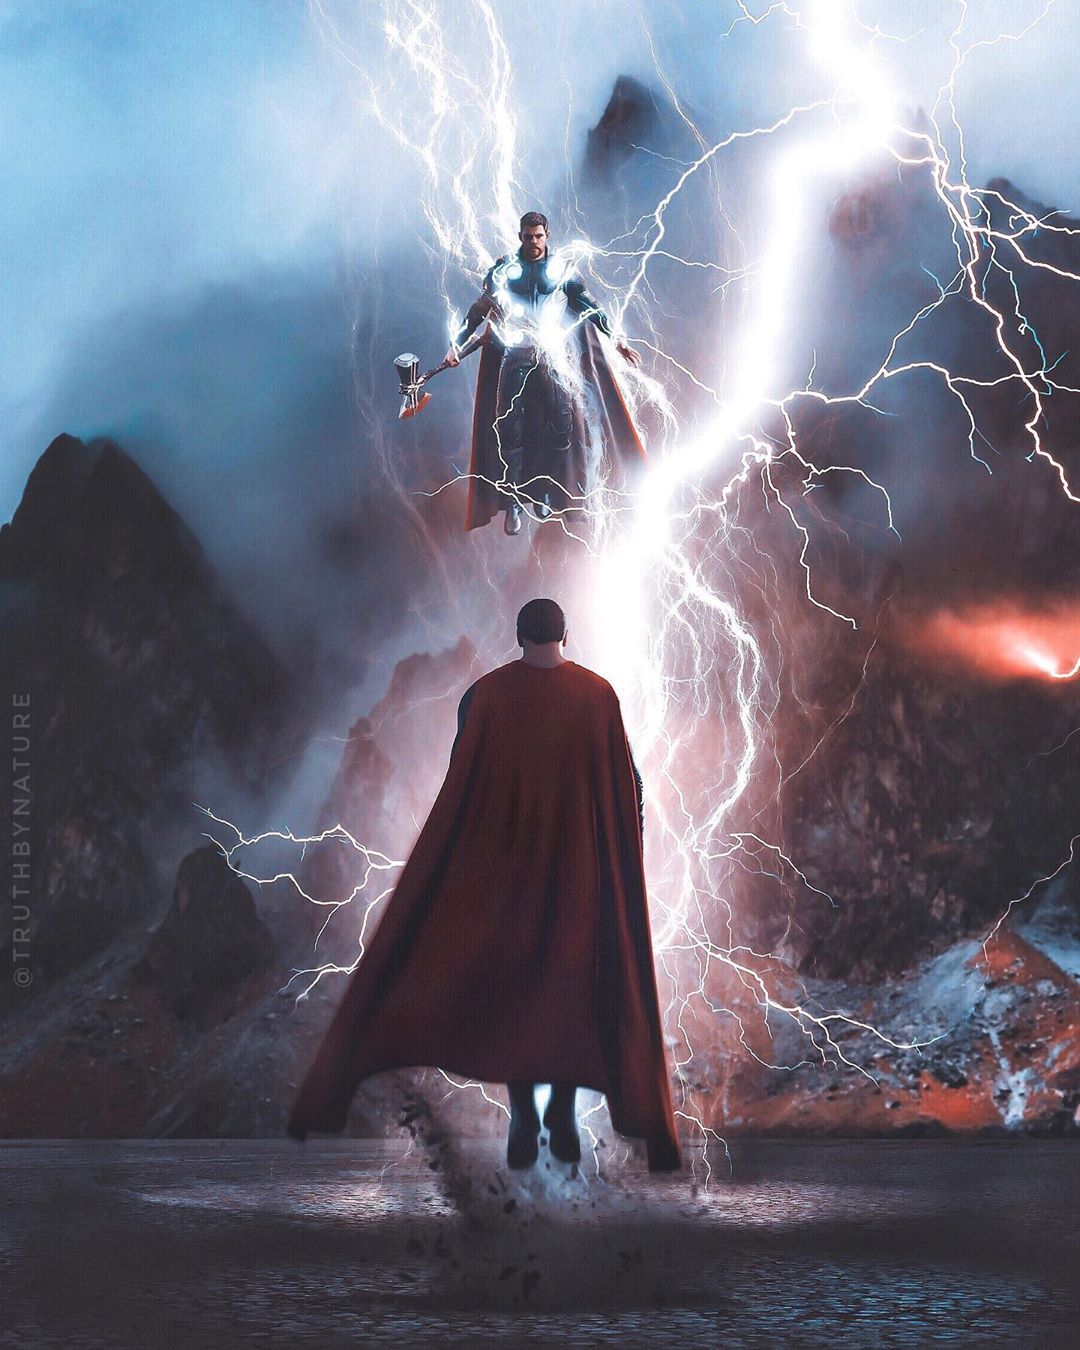 Truthbynature on Instagram: “Thor vs Superman · · How epic would this battle be?!